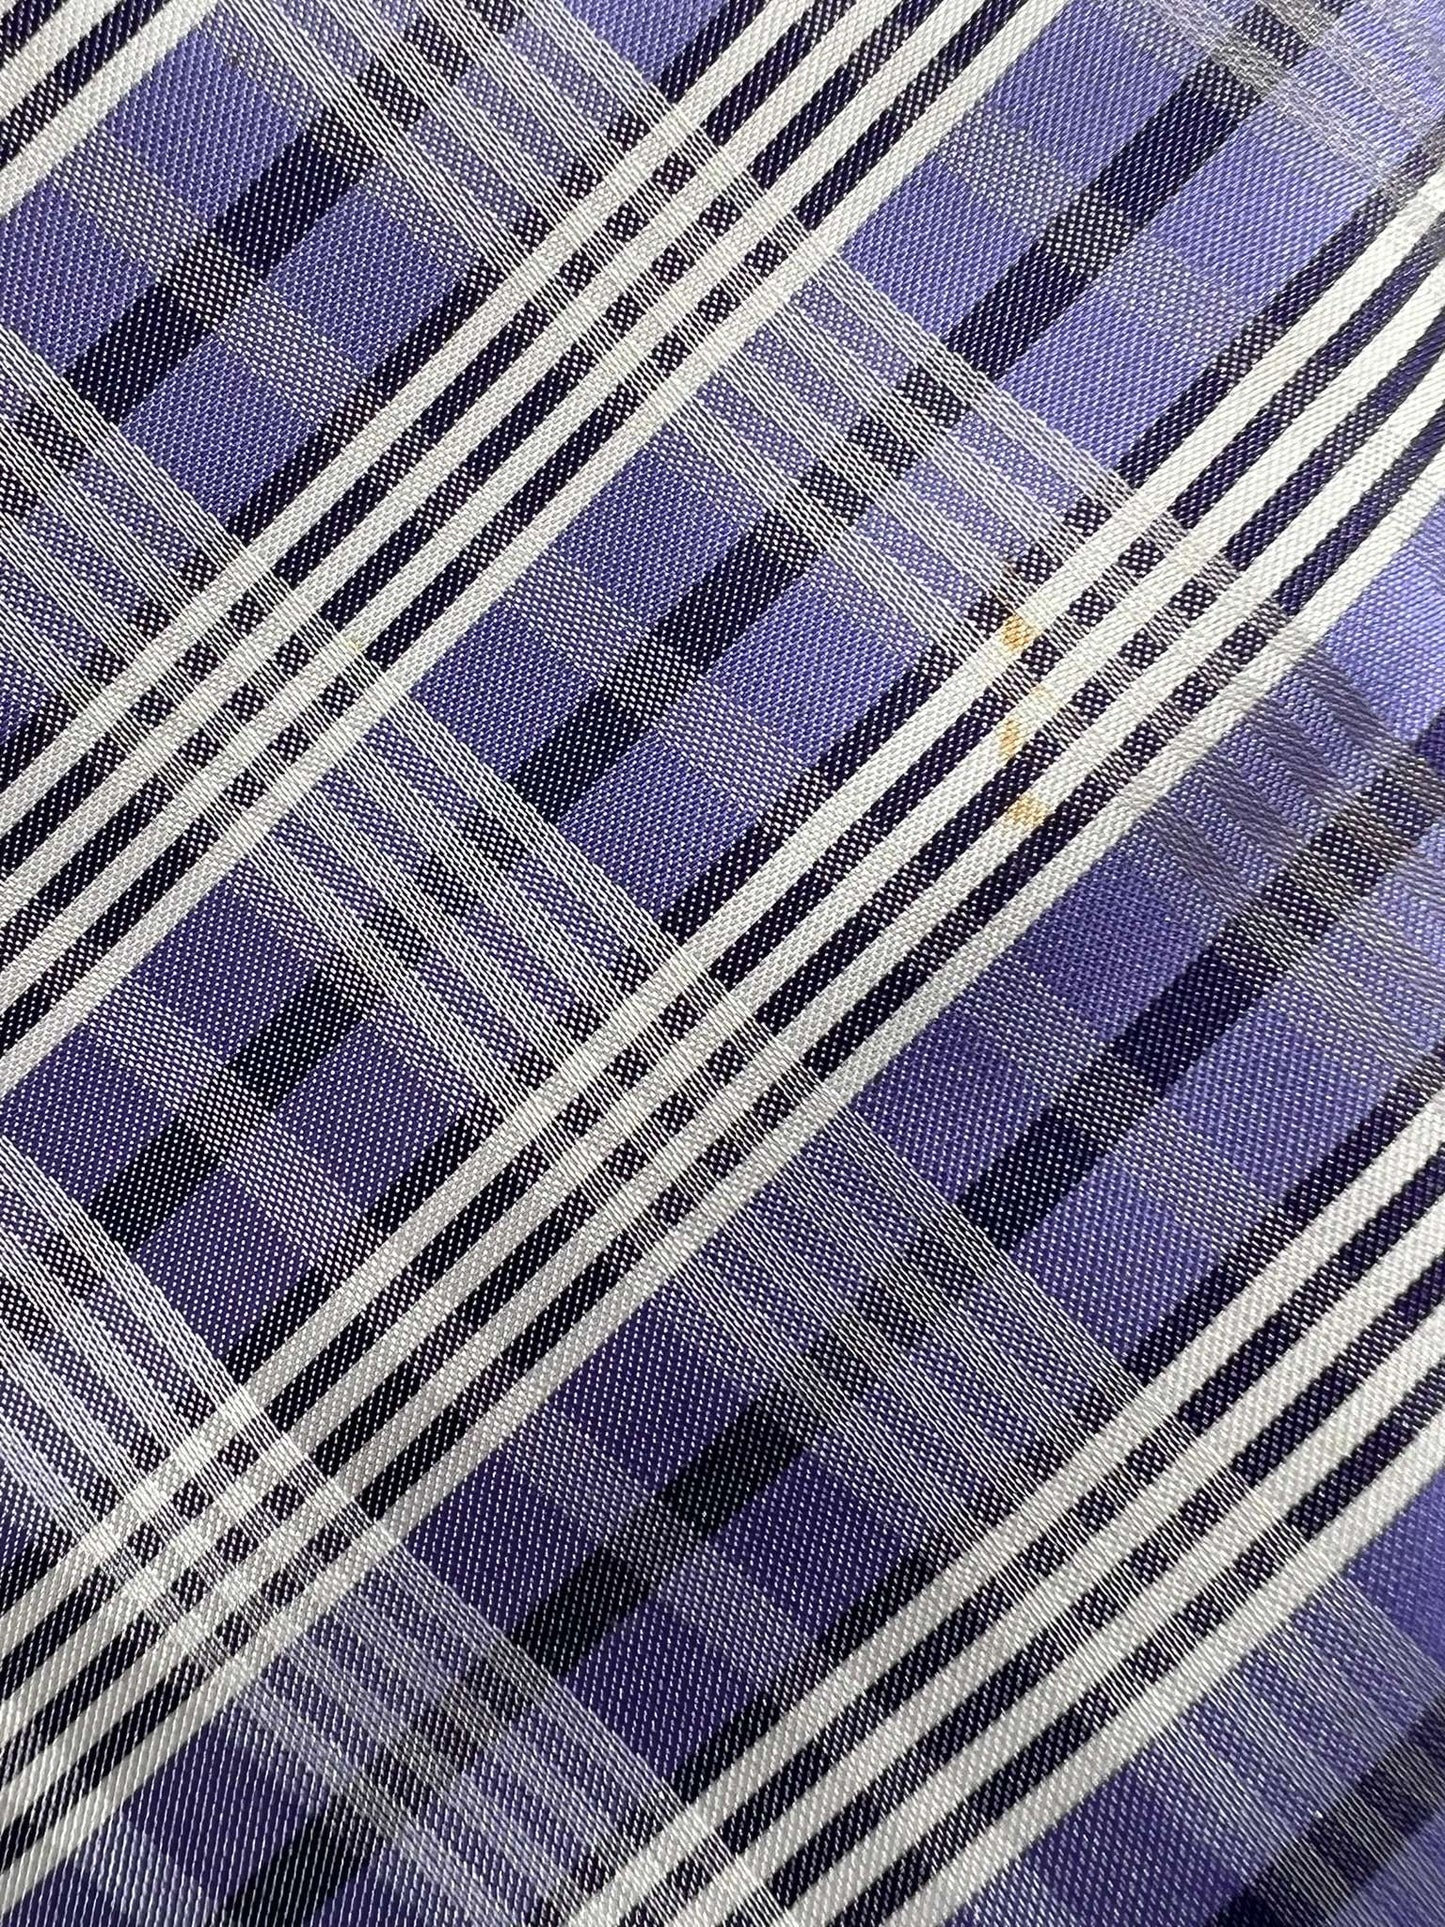 Vintage 90s Clueless Style Checkered Tie